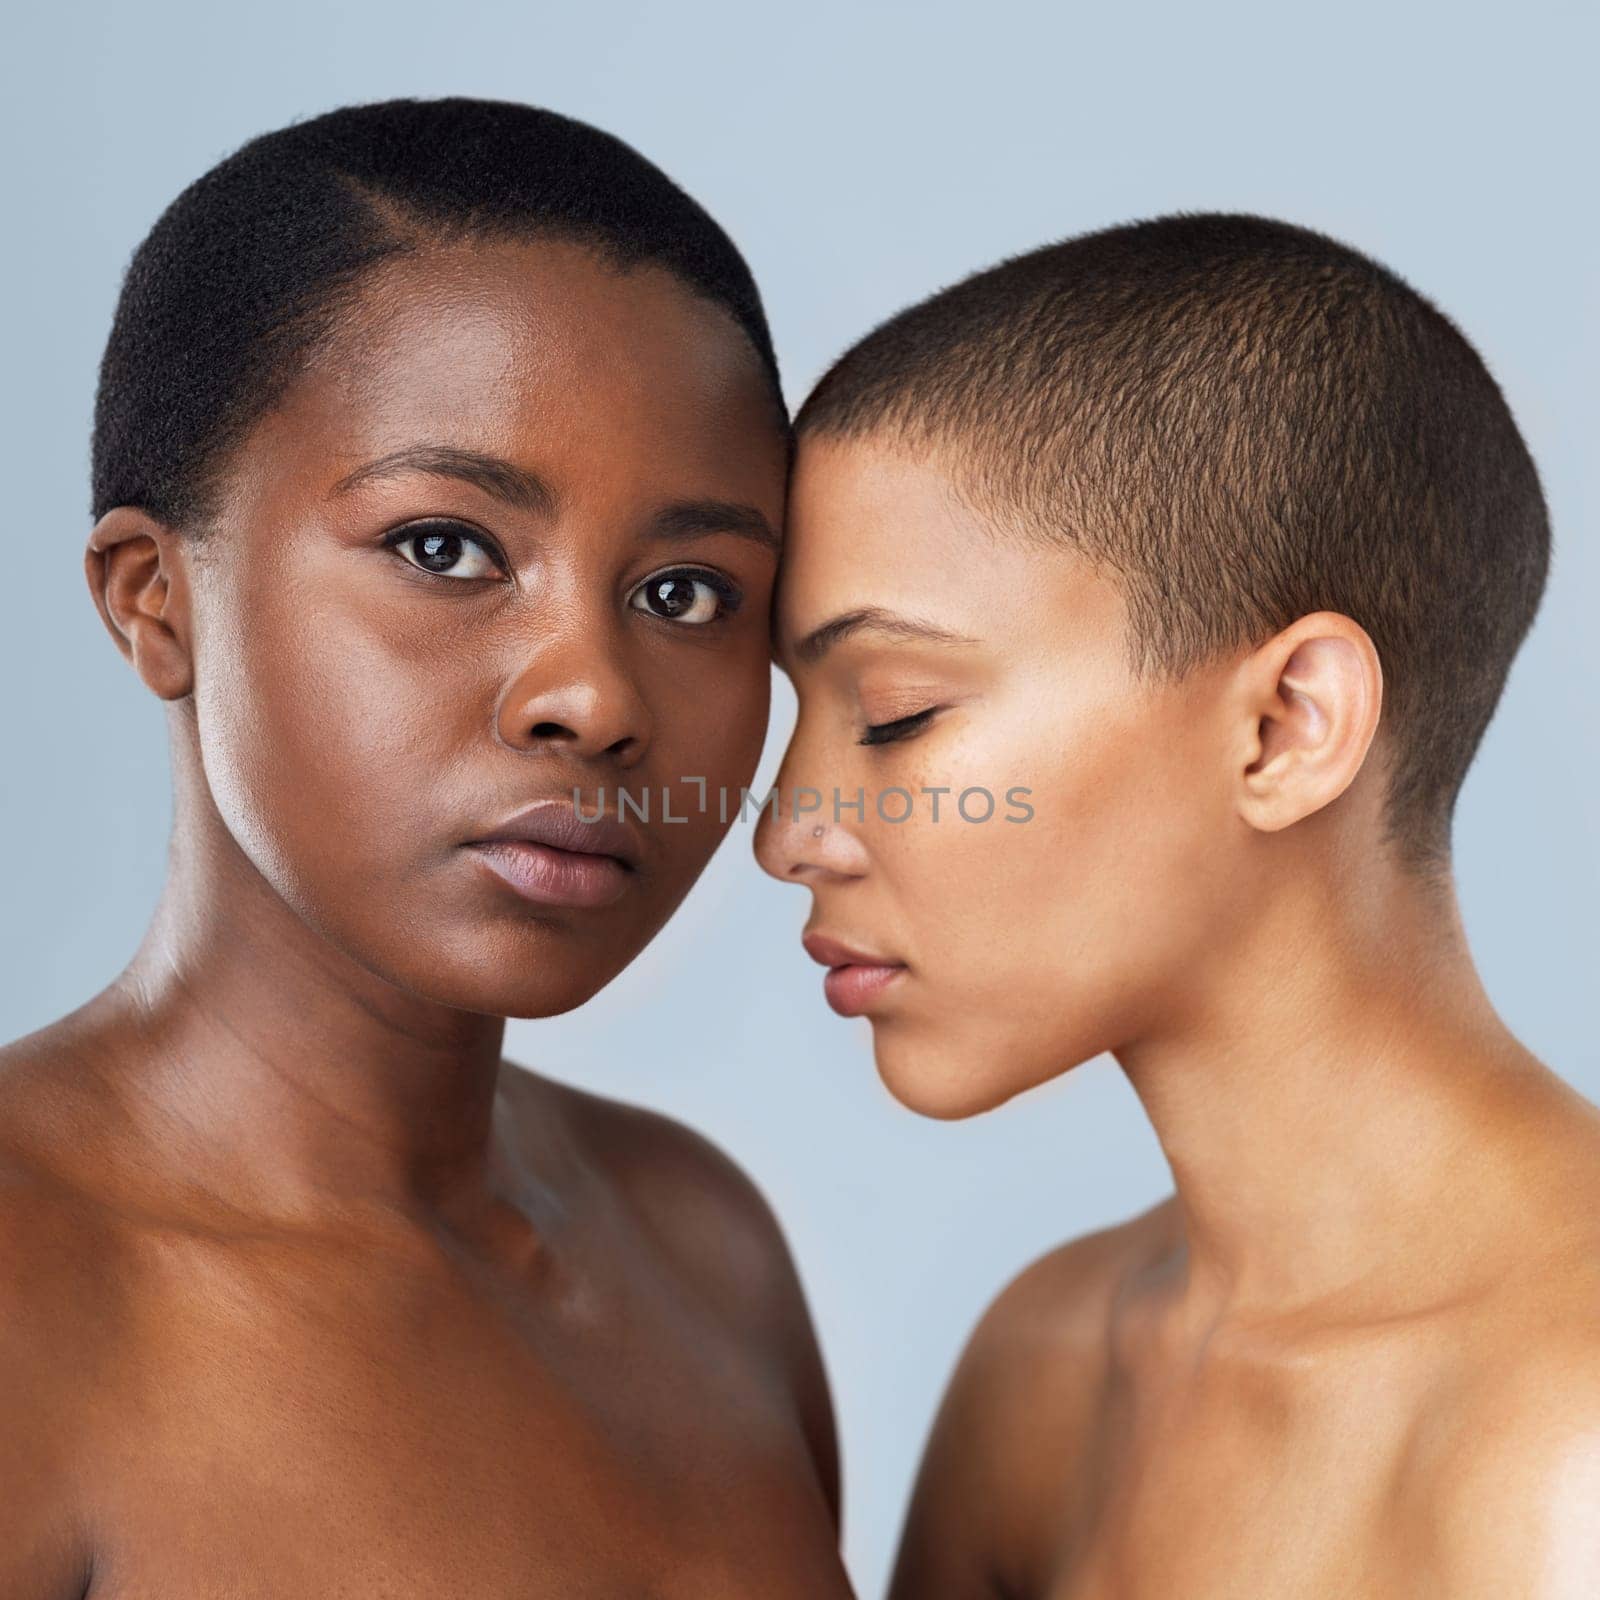 Our love is like no other. Portrait of two beautiful young women standing close to each other against a grey background